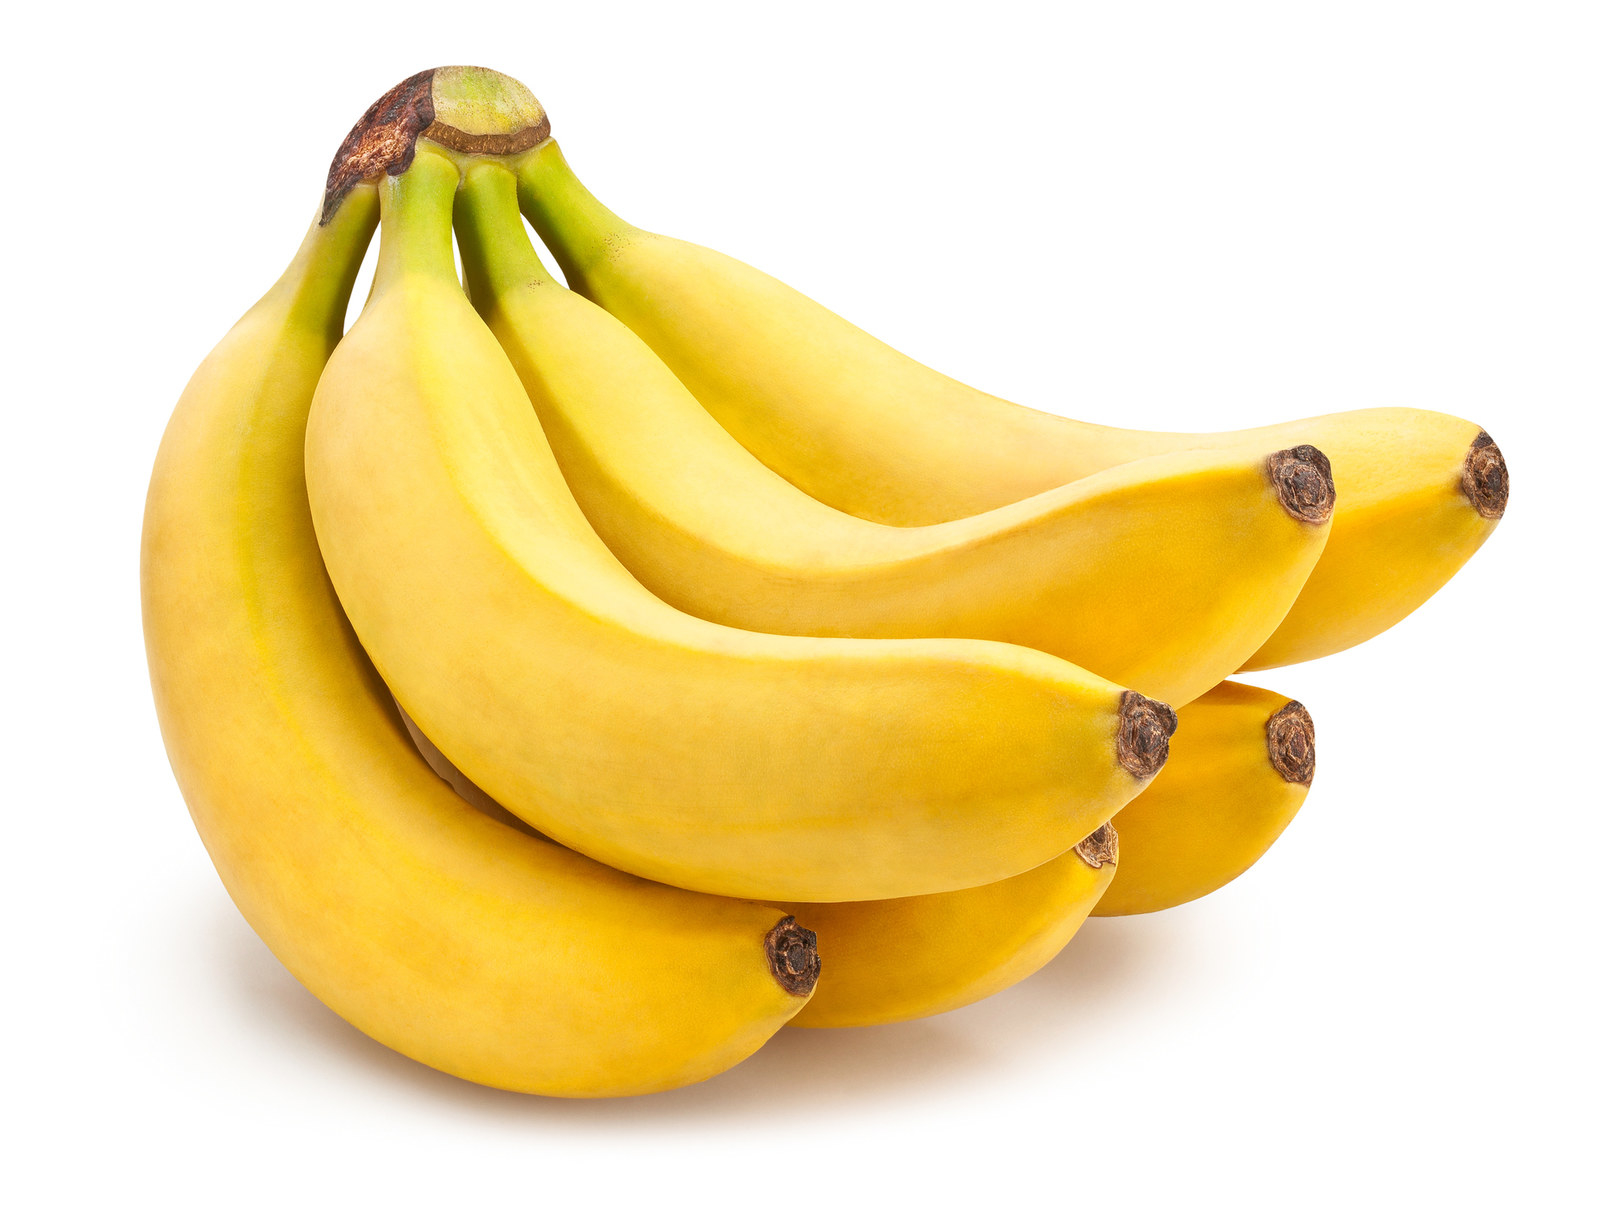 A Korean Market Is Selling Packs Of Bananas Of Varying Ripeness And